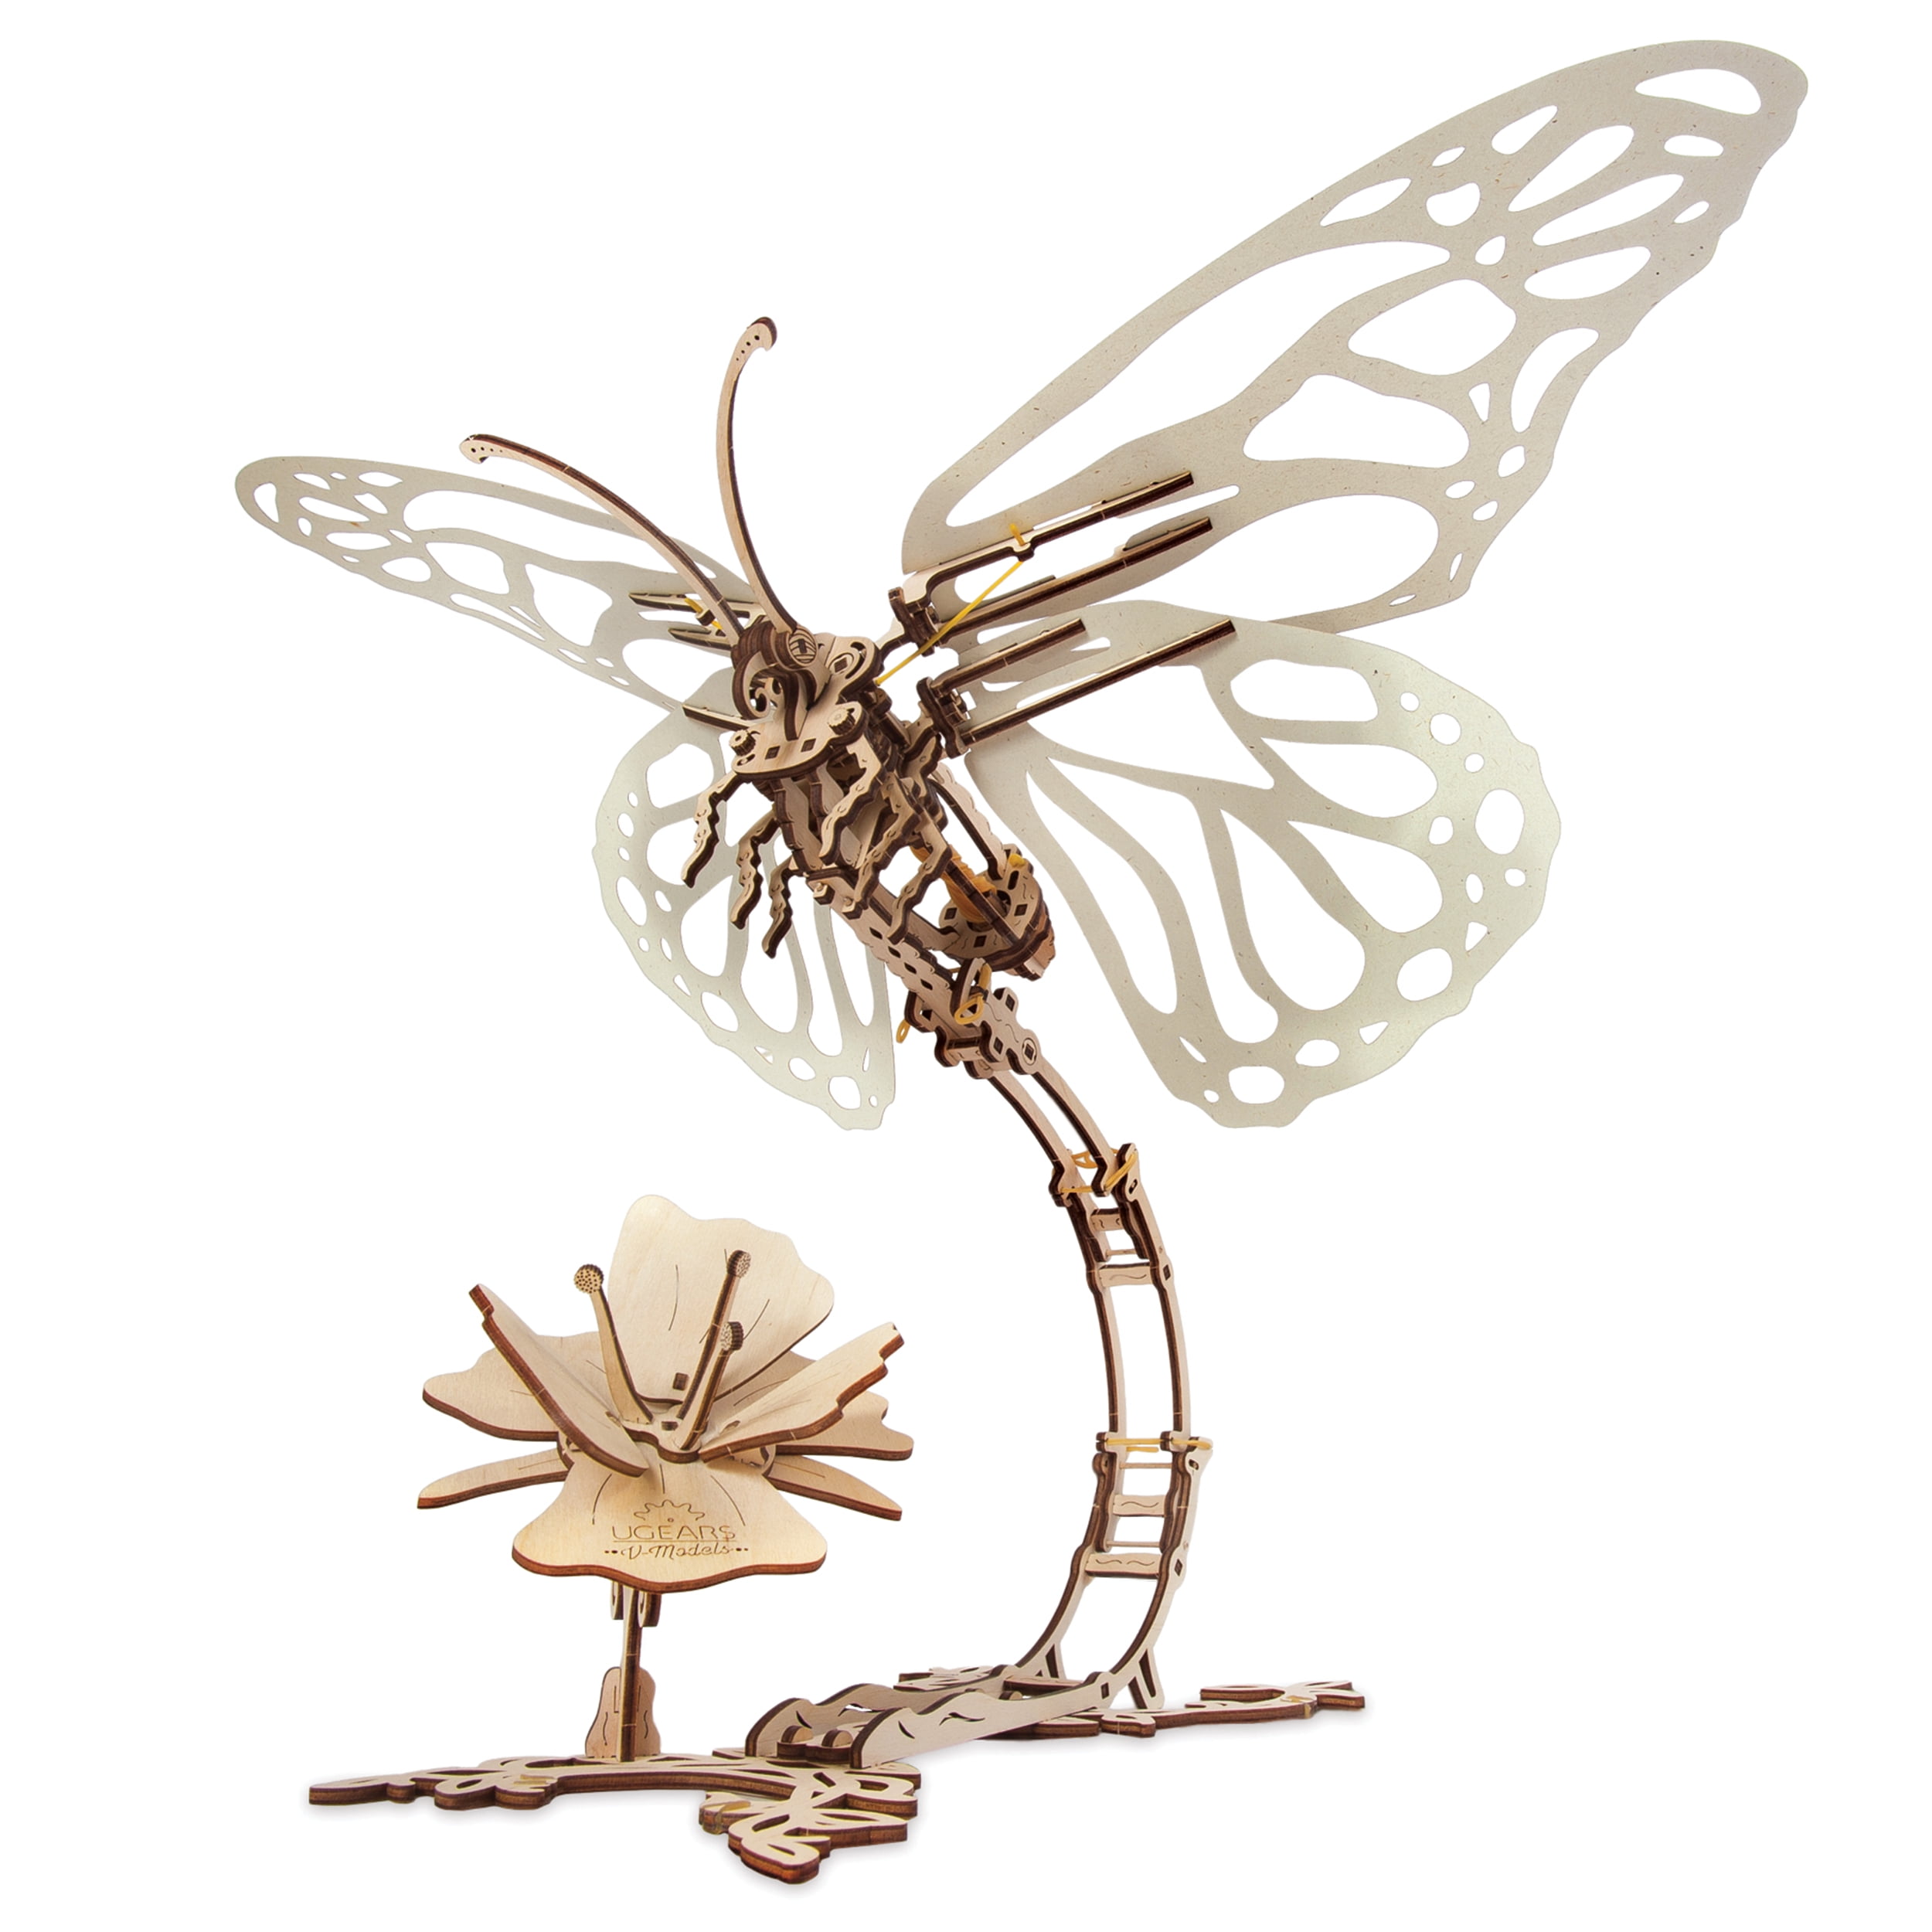 Self-Assembling Animal Puzzle Kit Wooden Insect Model Moving Wooden Mechanical Butterfly Model Wooden Model Kits for Adults and Kids Gift and Home Décor UGEARS Butterfly 3D Wooden Puzzle